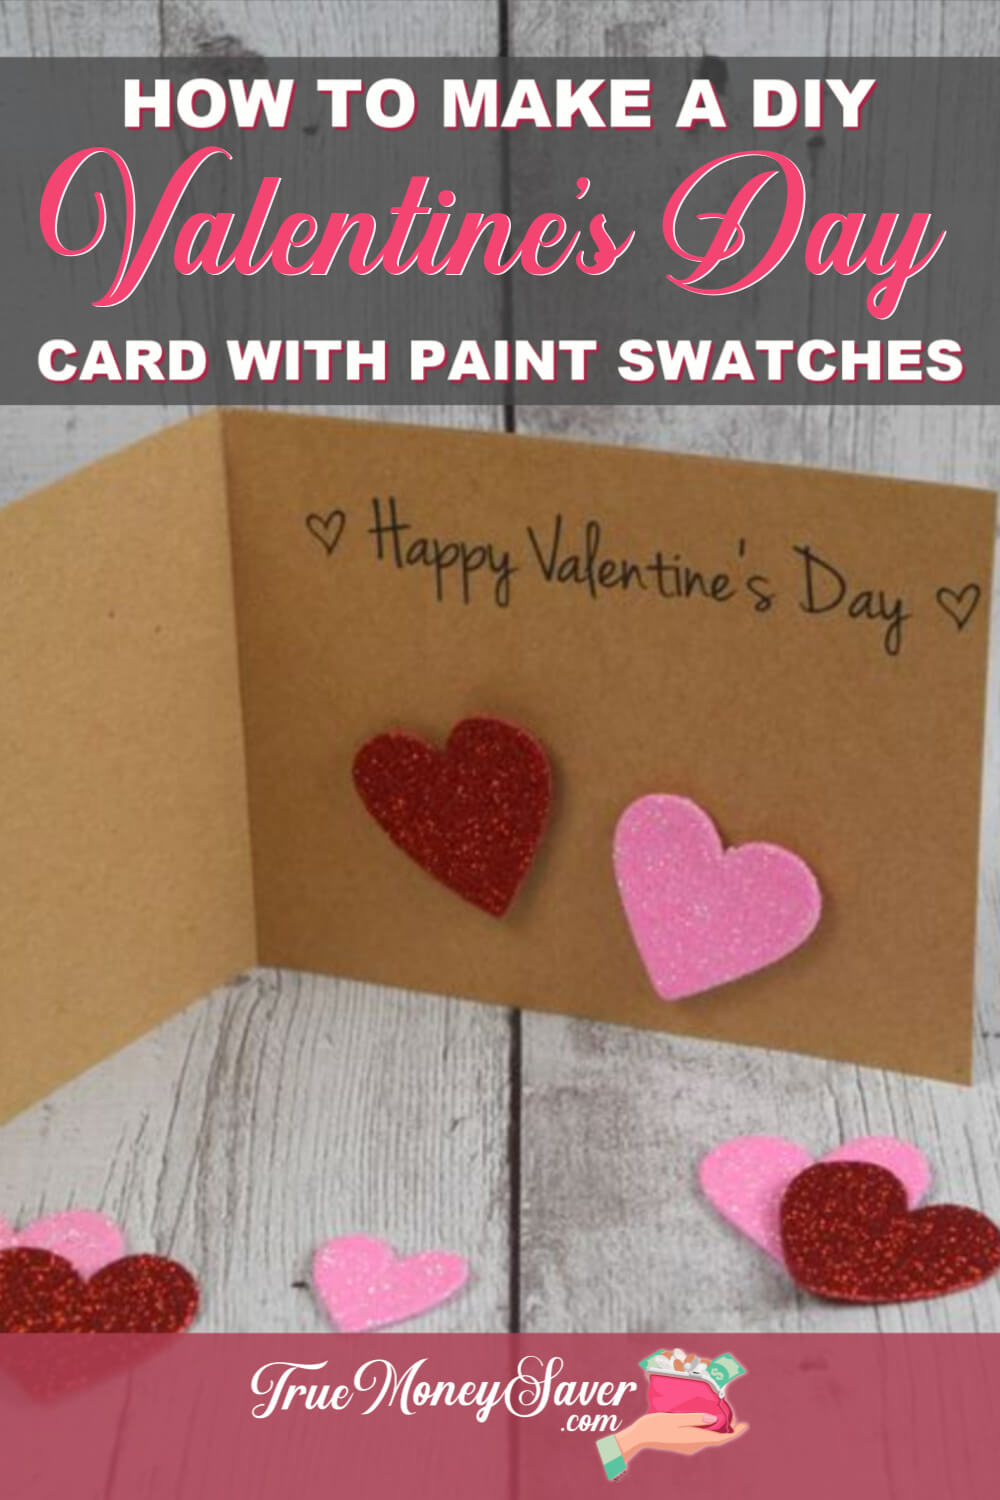 How To Make A Valentine’s Day Card With Paint Swatches